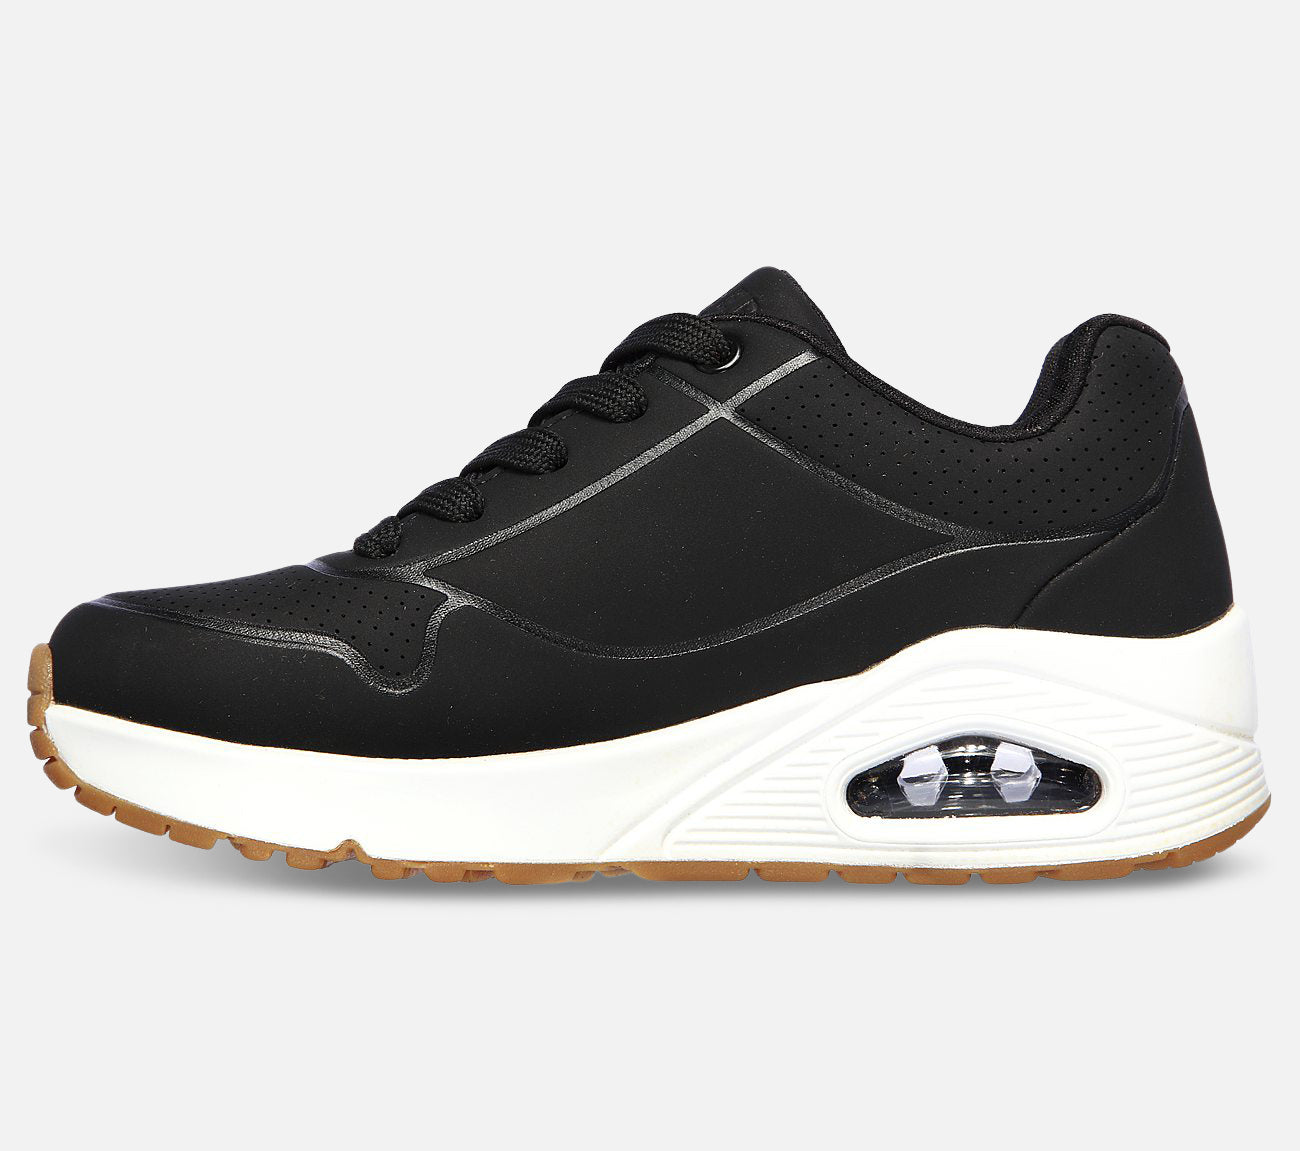 UNO - Stand on air Shoe Skechers